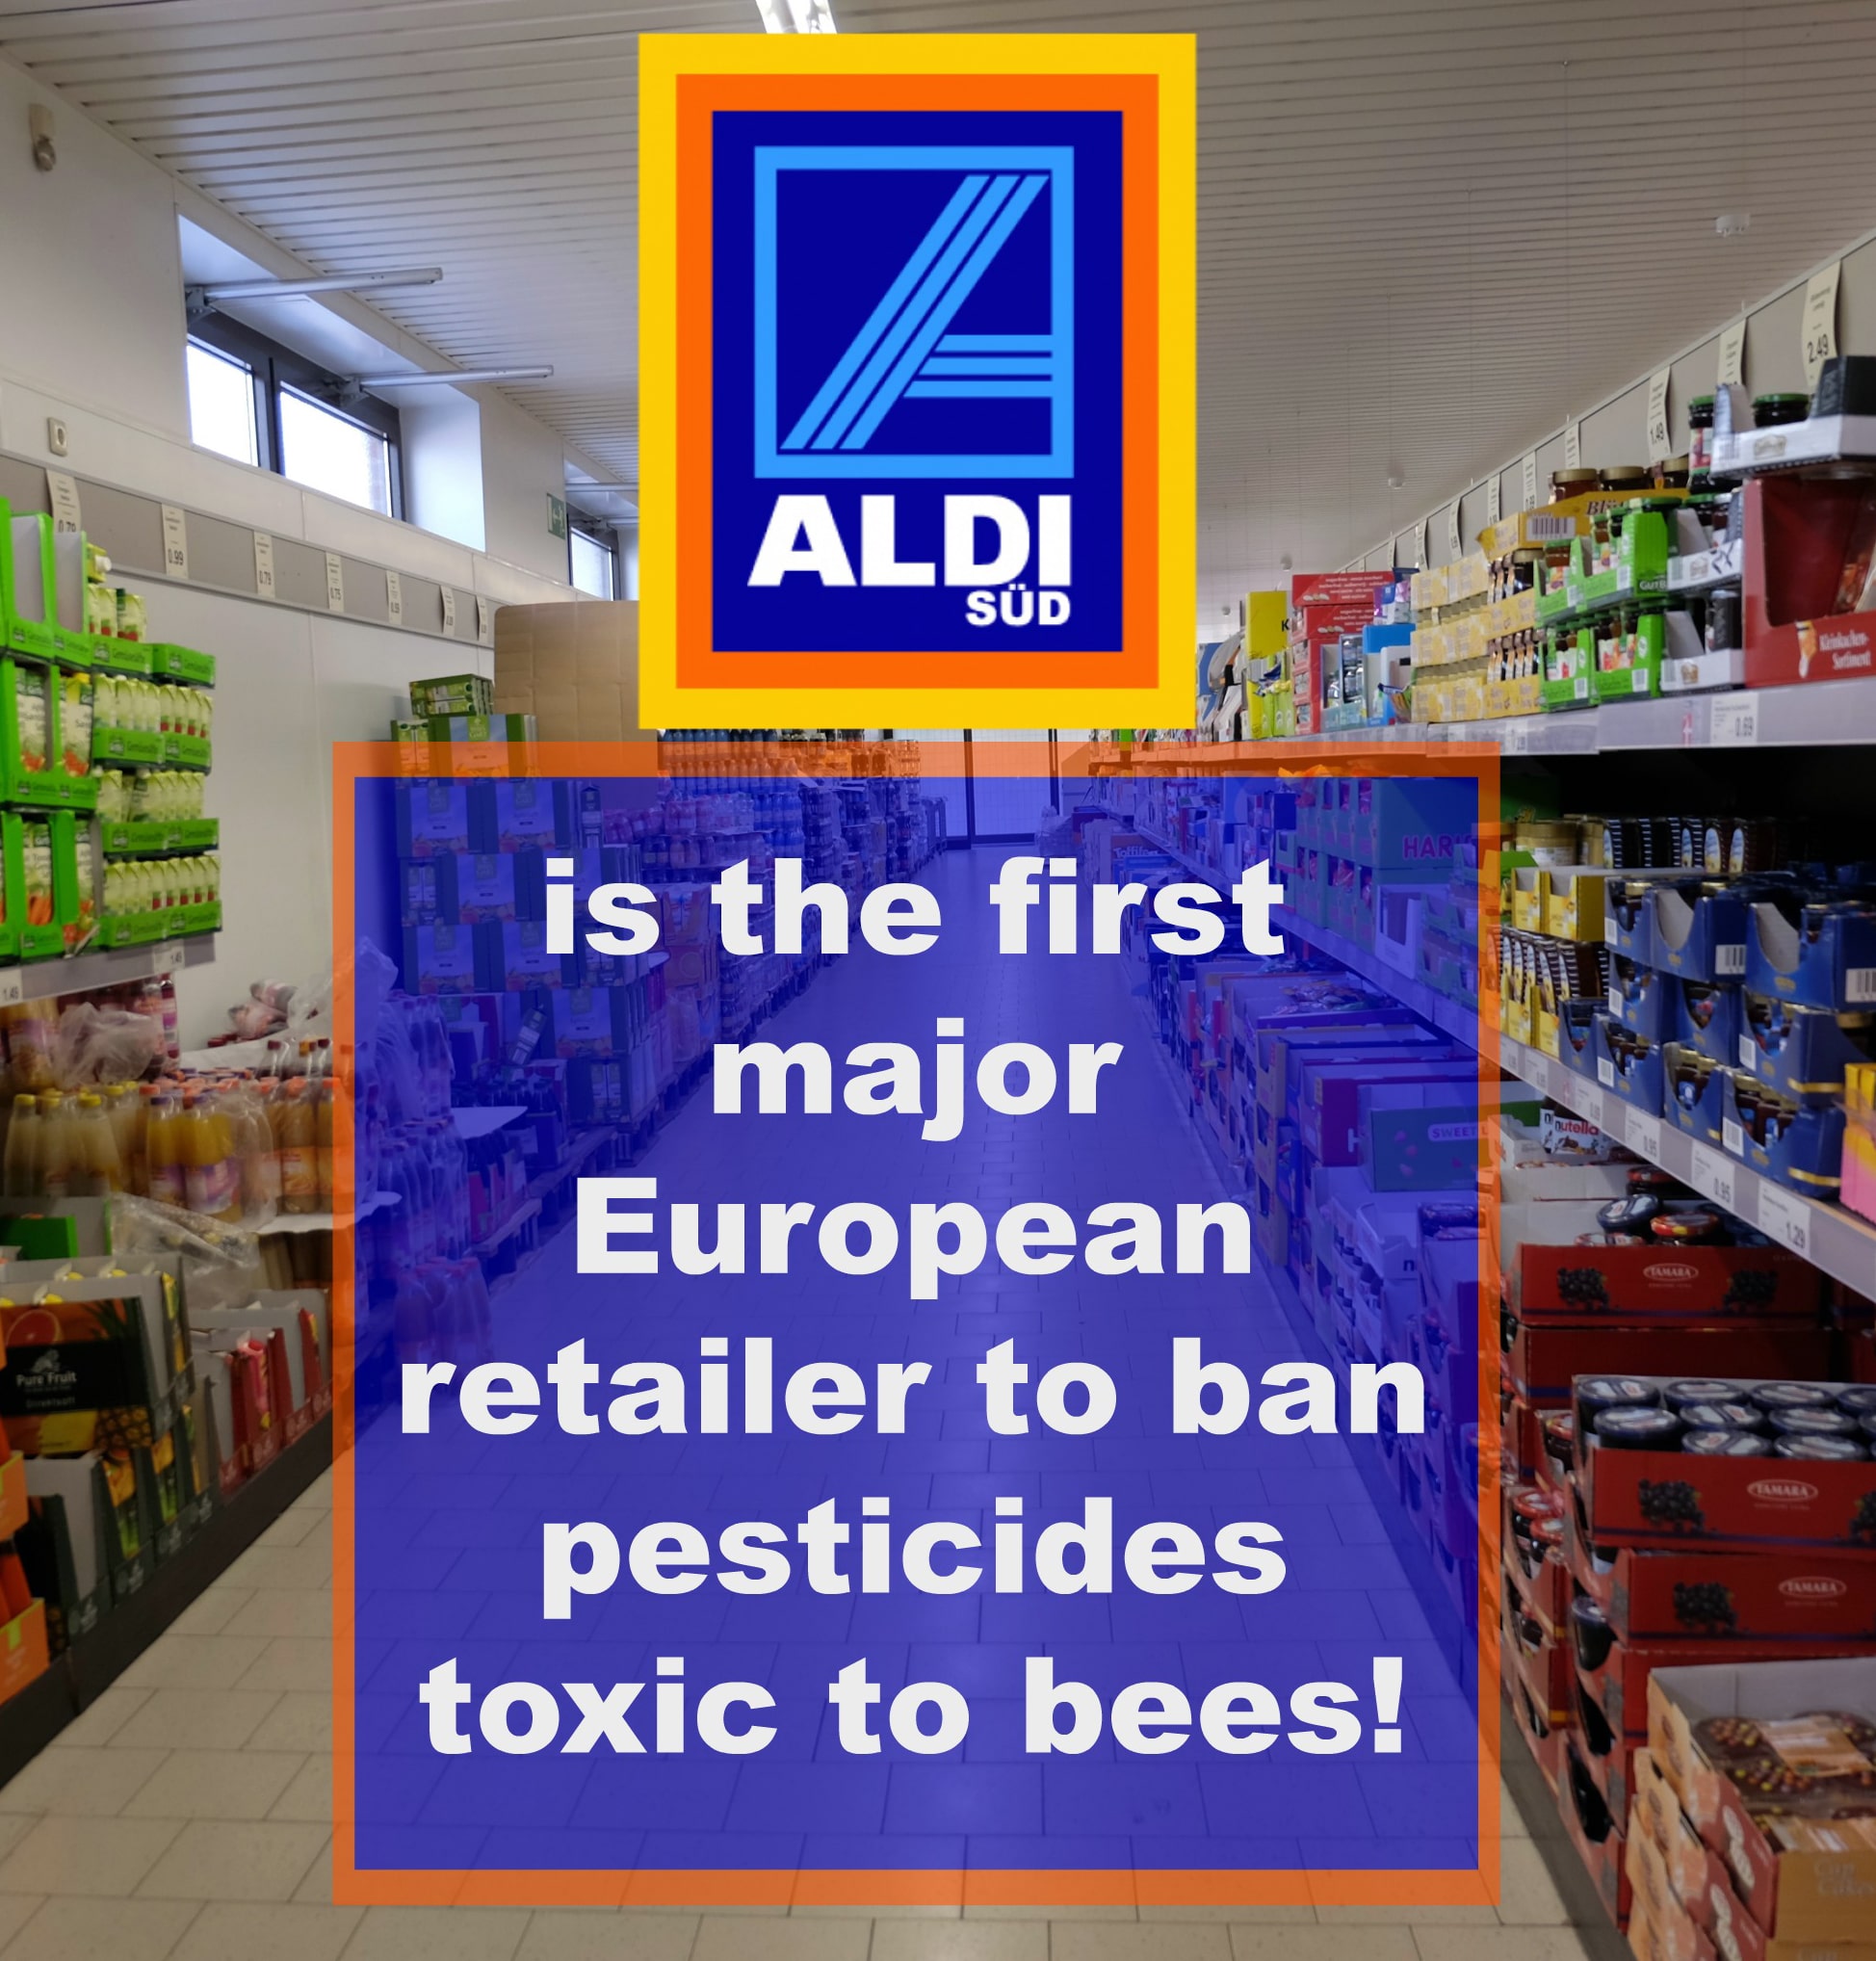 Aldi-Sud bans bee toxic pesticides in produce production